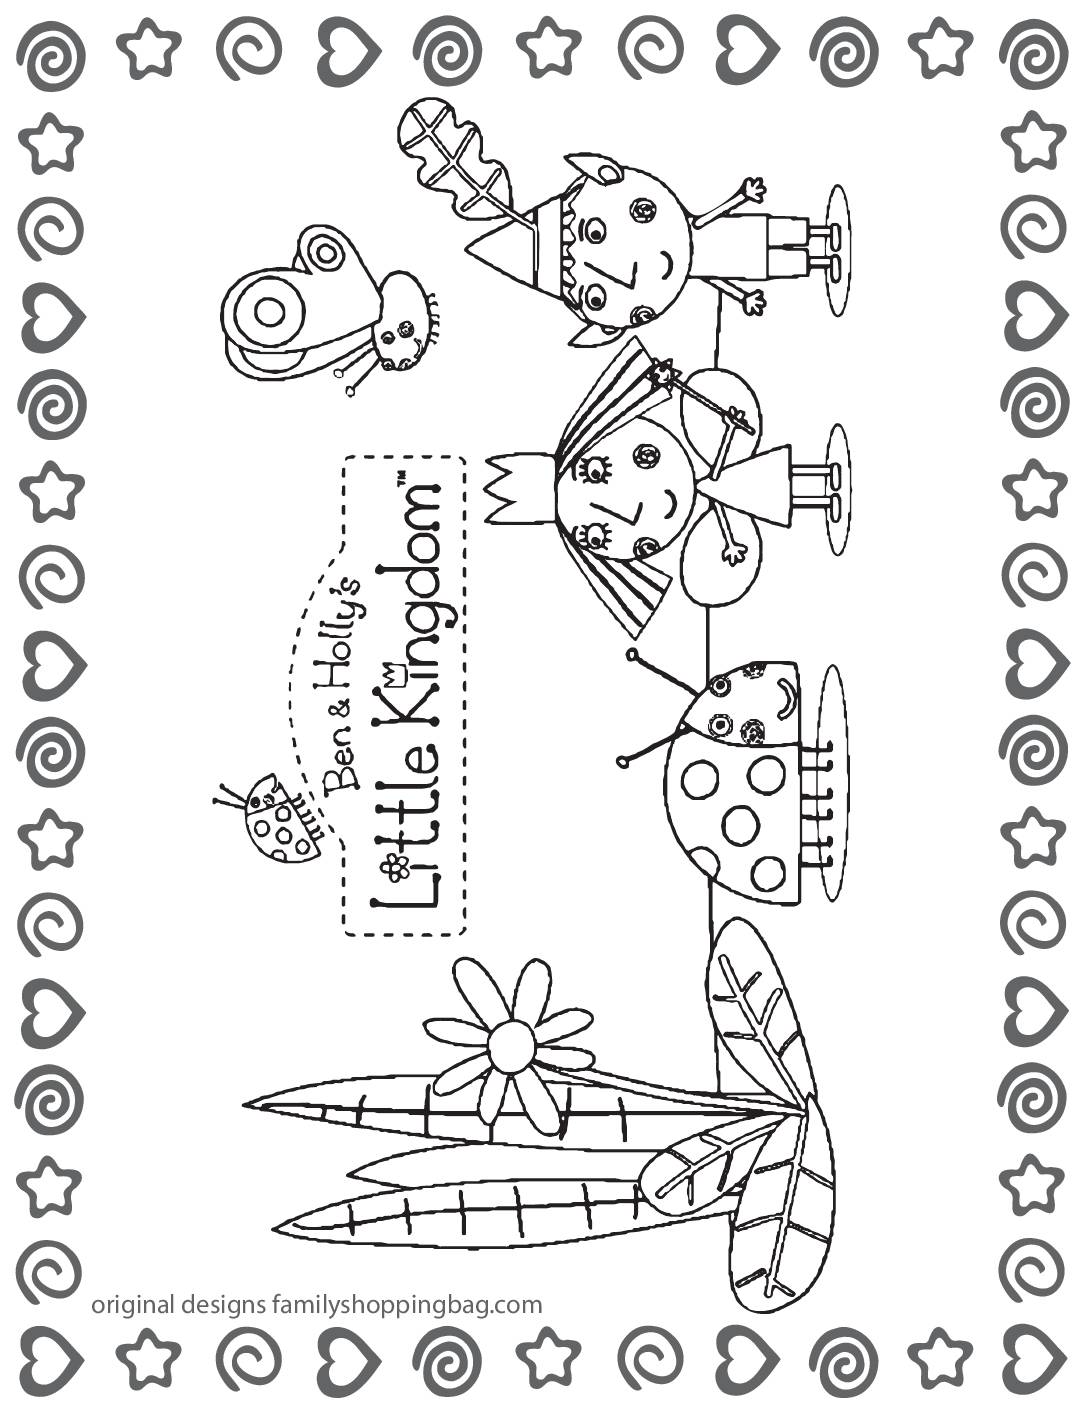 Coloring Page 1 Ben & Holly